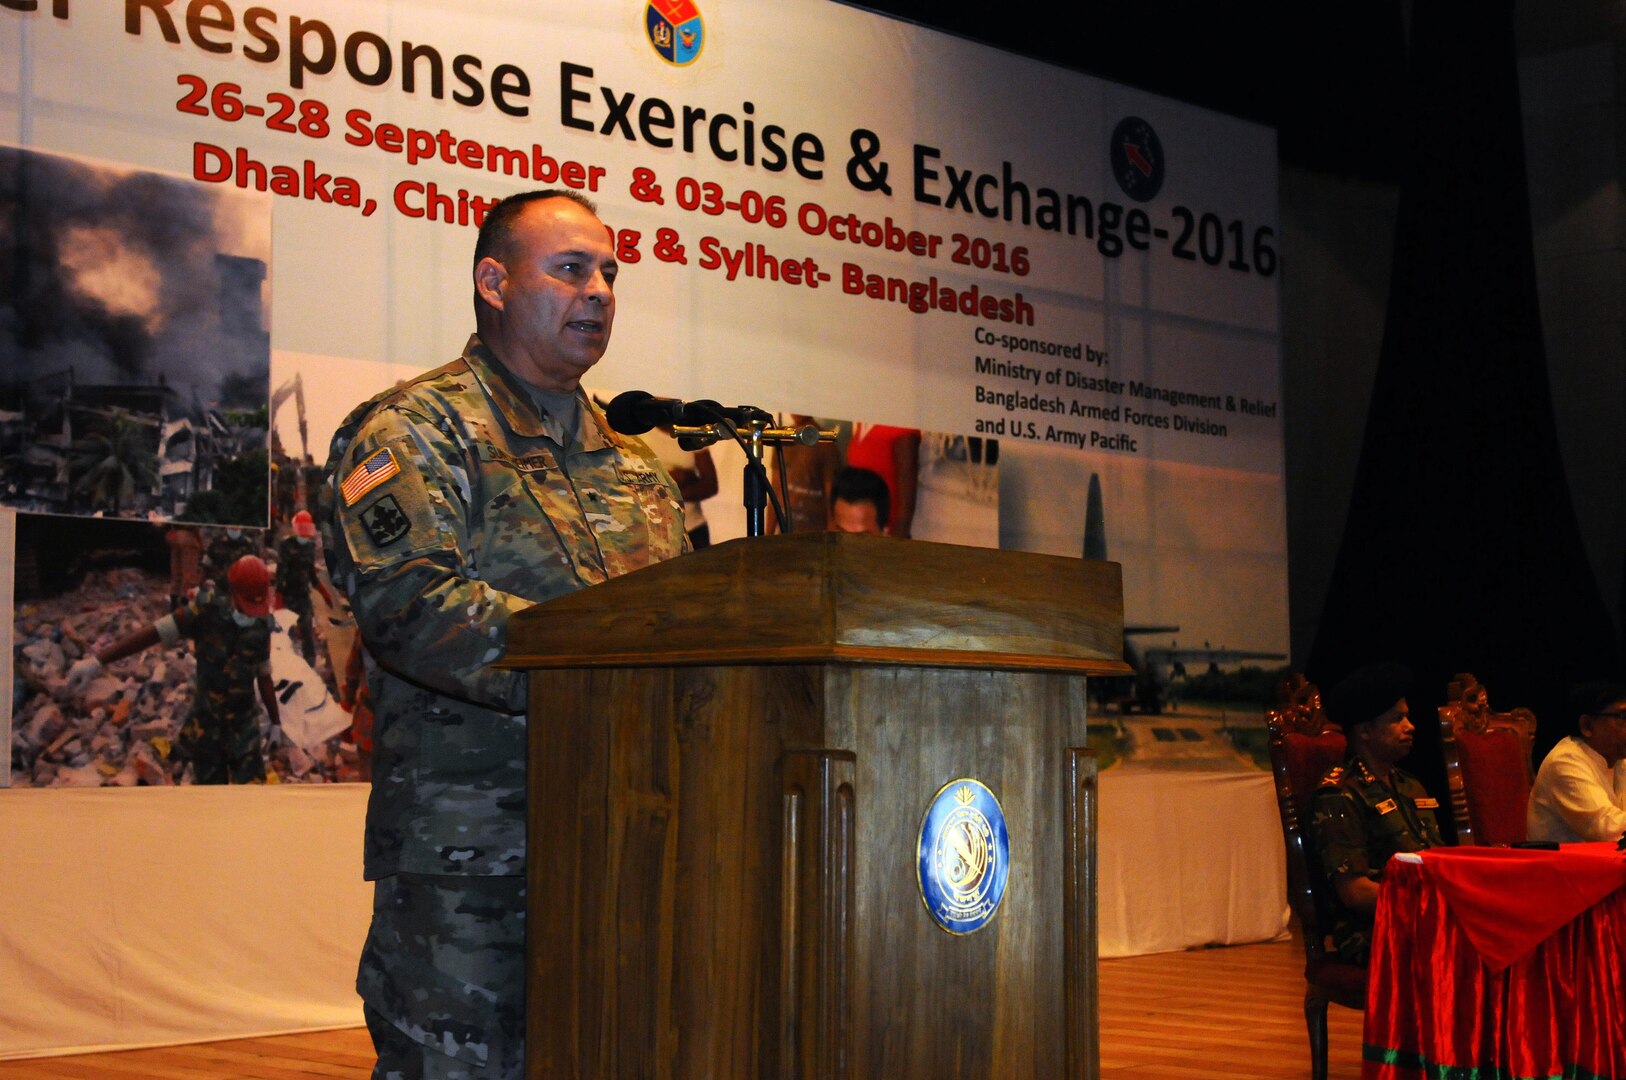 Brig. Gen. Bryan E. Suntheimer, Deputy Commander, Army National Guard, U.S. Army, Pacific, speaks to the participants of the 2016 Pacific Resilience Disaster Response Exercise & Exchange during closing ceremonies in Dhaka, Bangladesh, Oct. 6. The seven-day event brought together more than 250 participants from China, Maldives, Myanmar, Nepal, Sri Lanka, the United Kingdom, the United Nations and the United States, as well as dozens of governmental and non-governmental and international organizations. (U.S. Army photo by Staff Sgt. Chris McCullough)